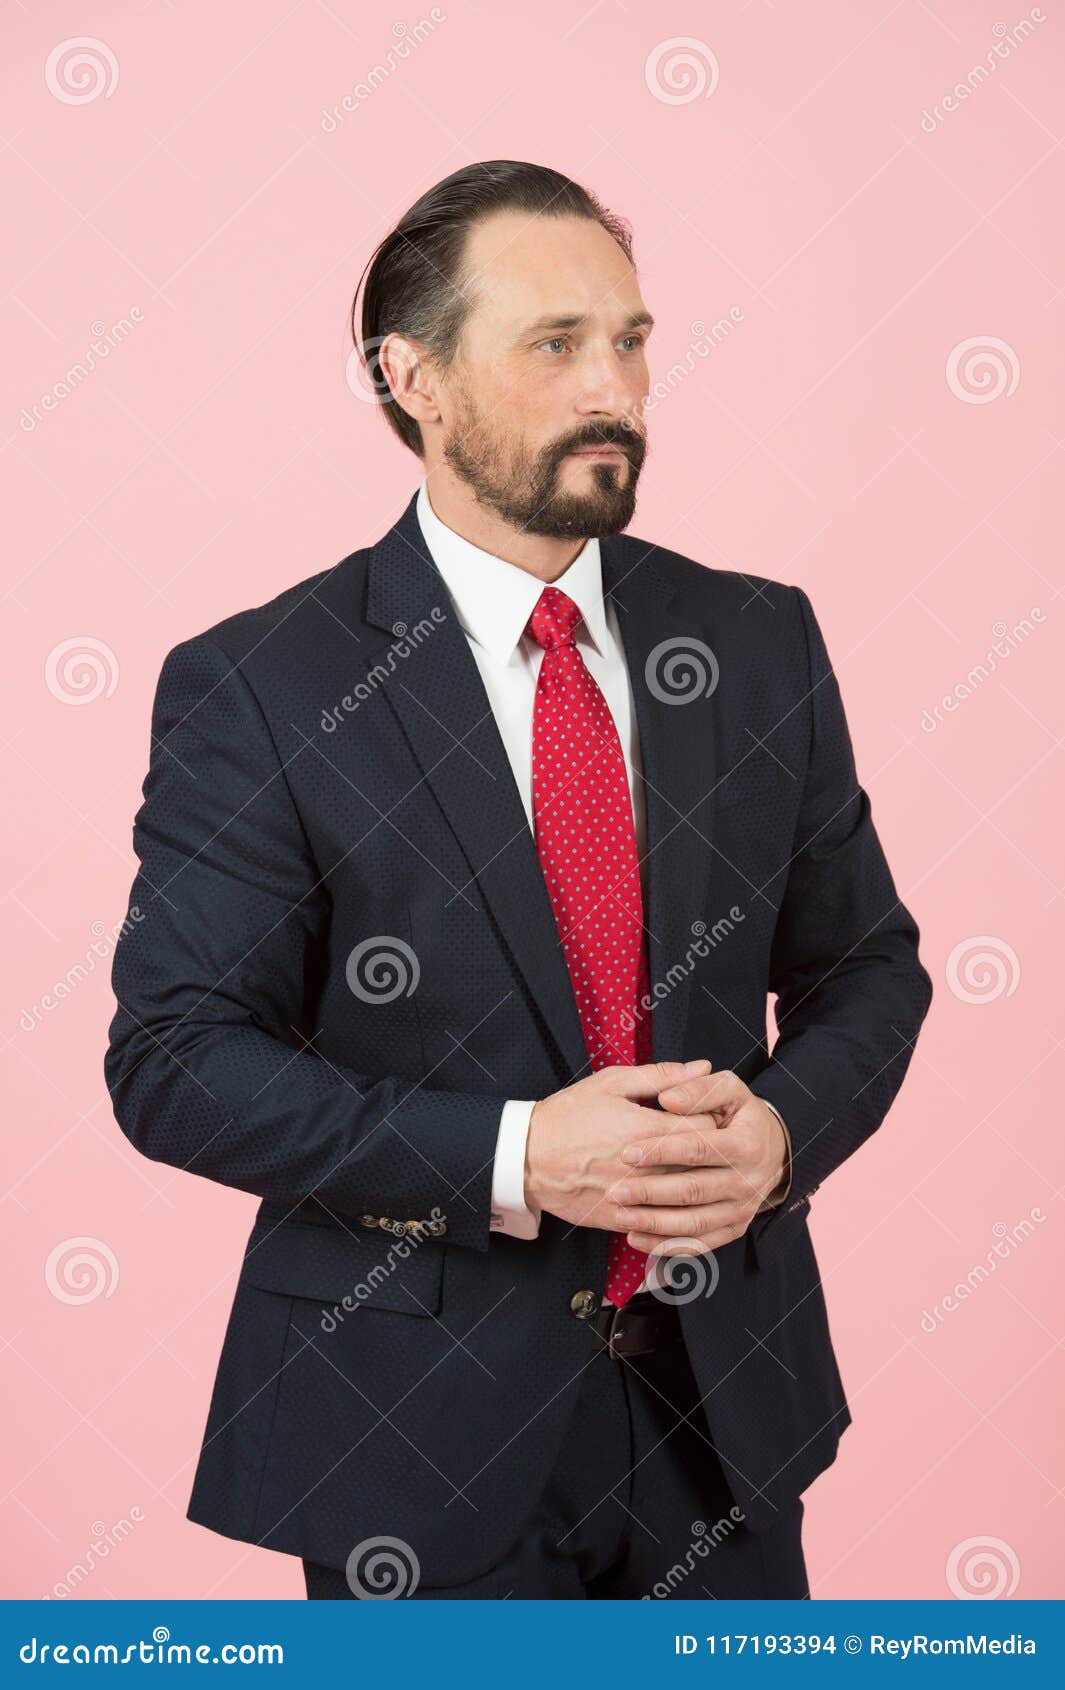 Profile of Manager with Red Tie and Black Suit Isolated in Studio Over Pink Background  Stock Photo - Image of hairdresser, caucasian: 117193394